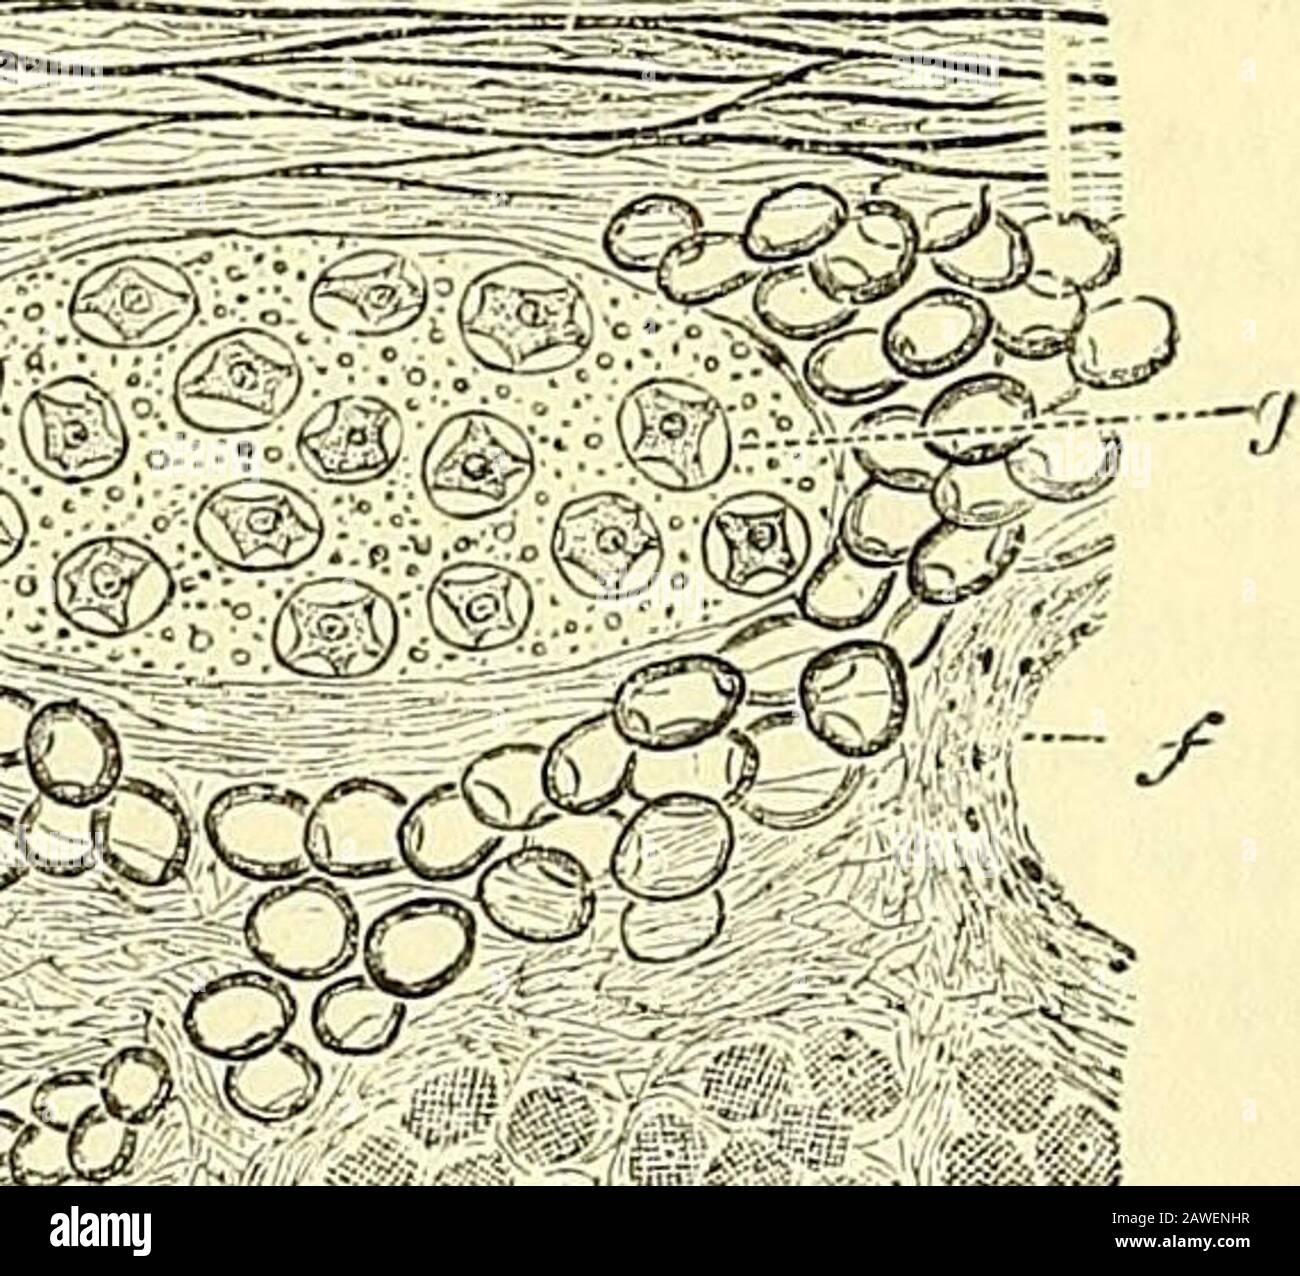 Quain's elements of anatomy . e coursein the heart they are beset at mtervals with small groups of ganglion-cells, andon all their branches in the venous sinus and in the interauricular septum similarcells occui, either intercalated in the small nervous cords, or set laterally uponthem. No ganglion-cells have been proved to occur either on the branches whichare distributed to the auricles (with the exception of the septum) or on thosewhich pass to the muscular substance of the ventricle. The cardiac pericardium or epicardium has the usual structure ofa serous membrane. It is covered externally Stock Photo